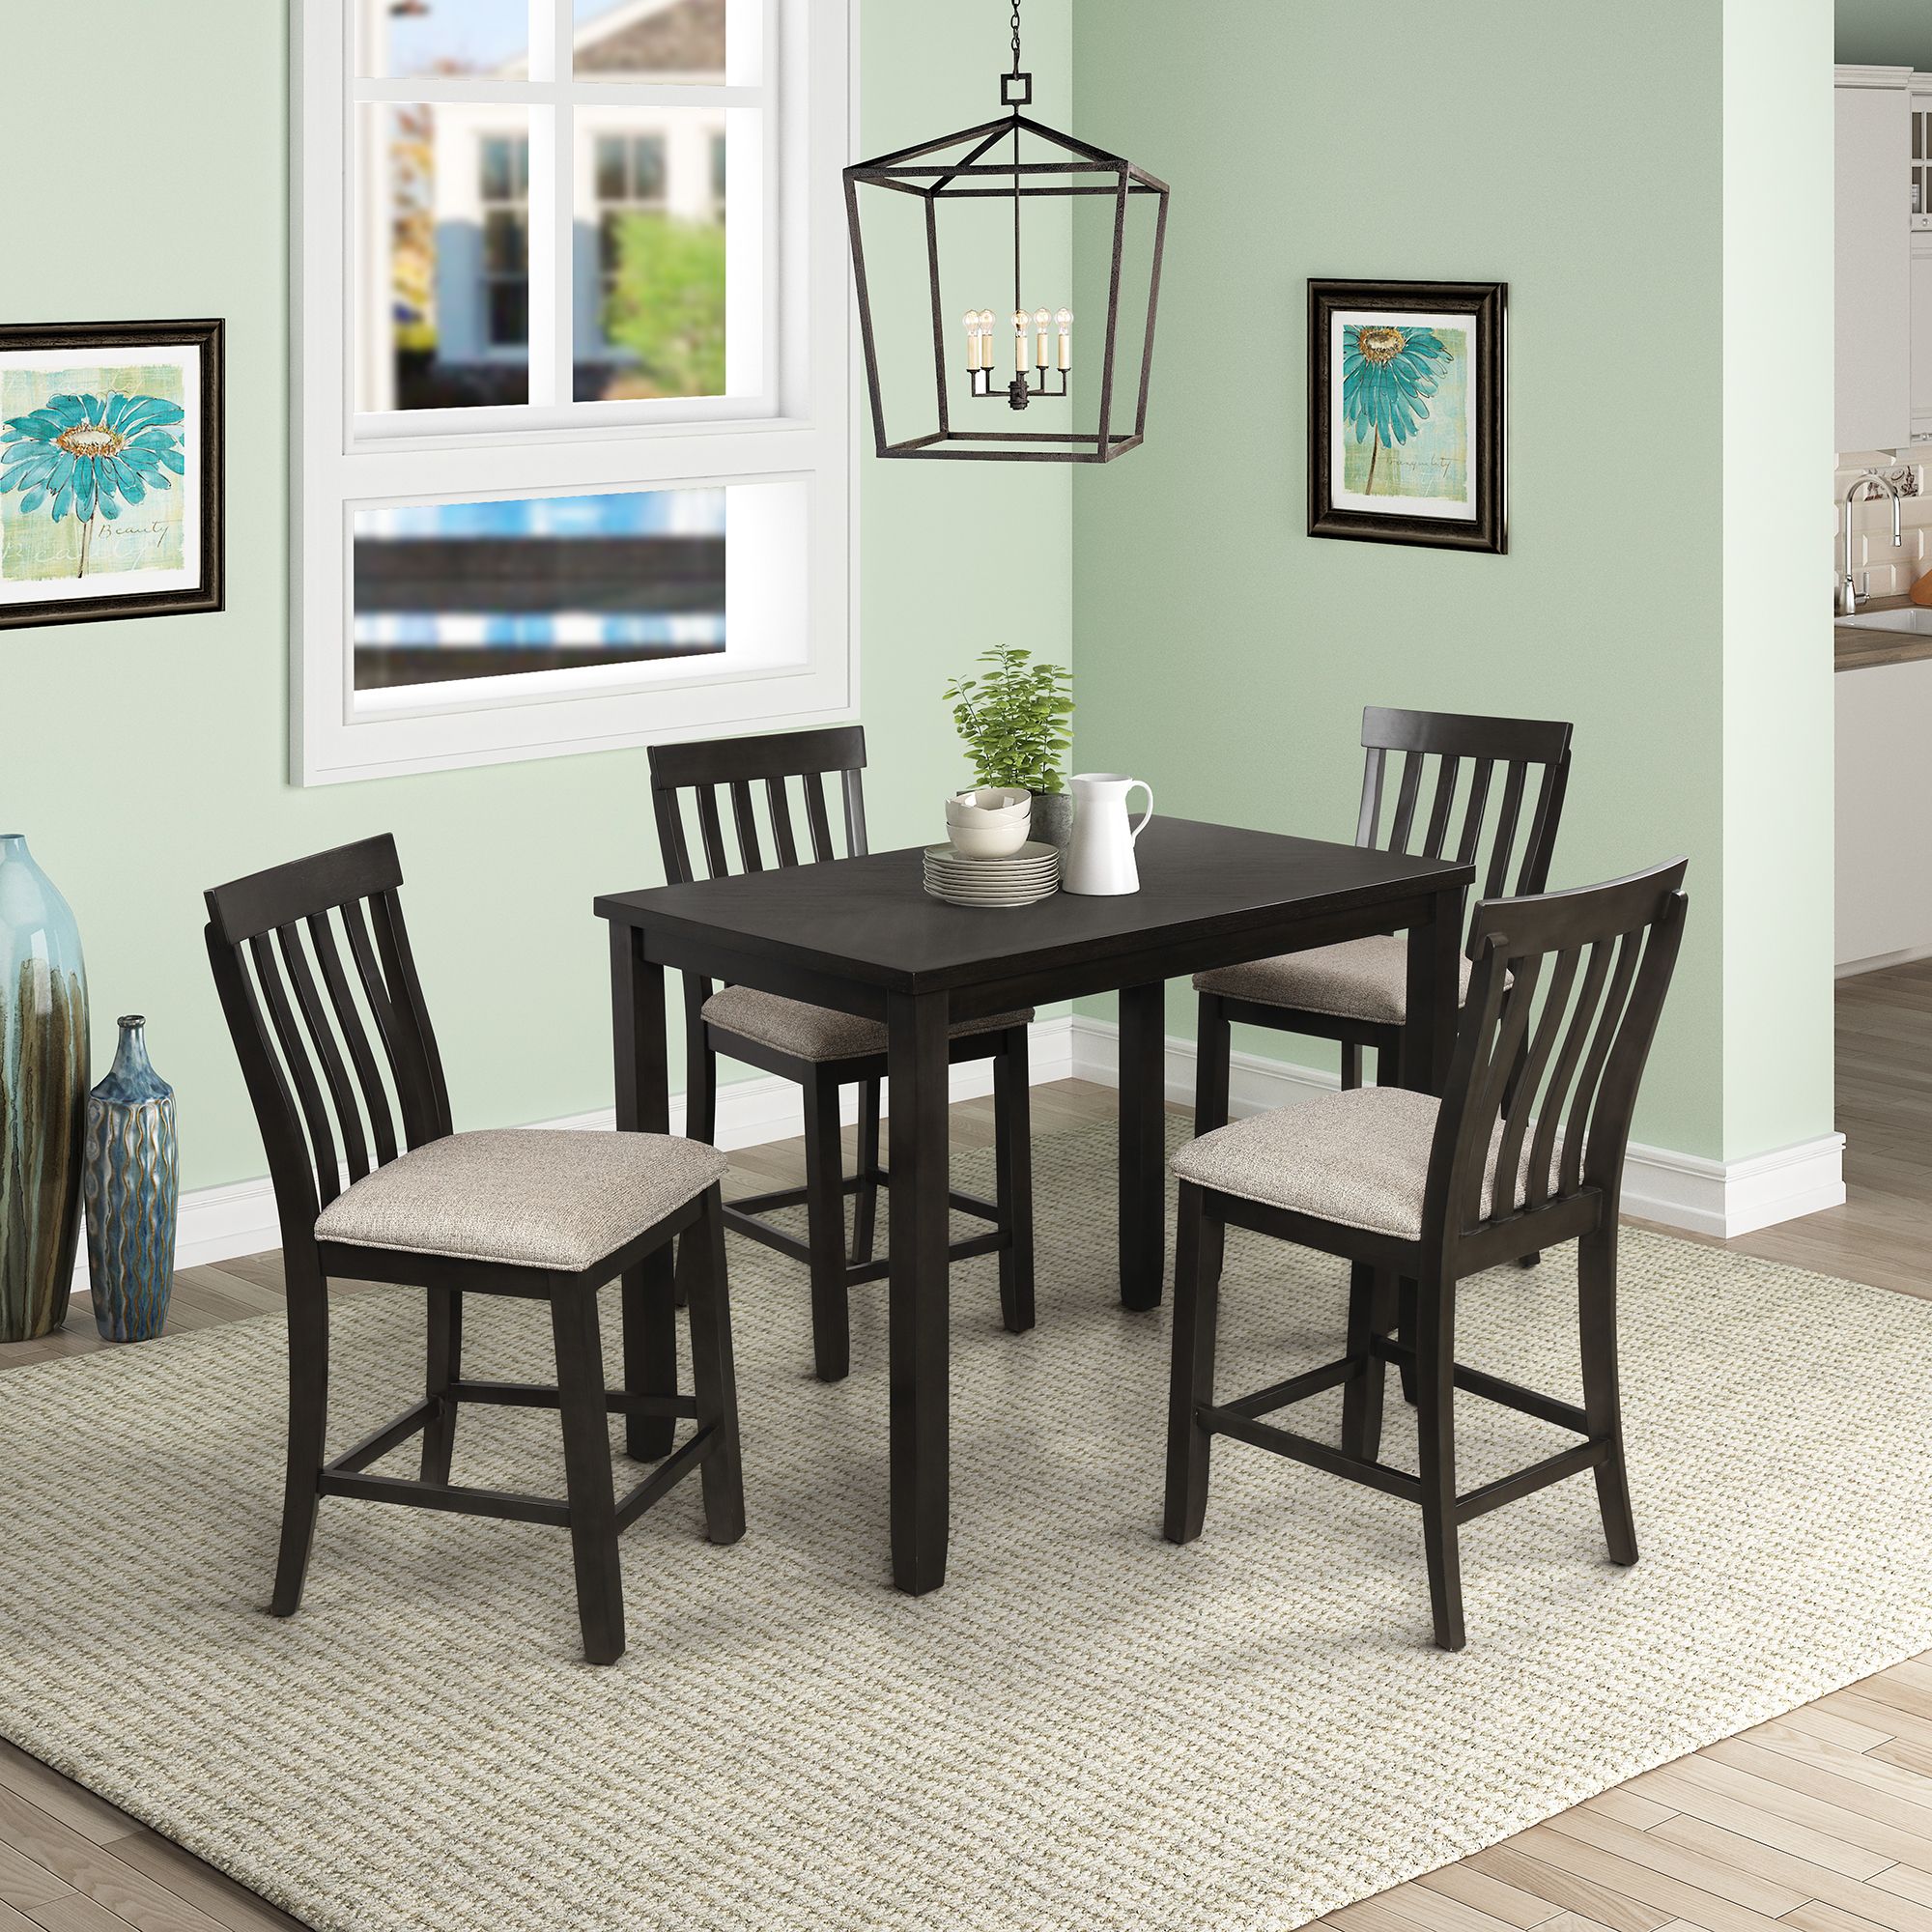 5 Pieces Counter Height Dining Table Set, Rectangular Wood Kitchen Regarding Wood Bistro Table And Chairs Sets (View 10 of 15)